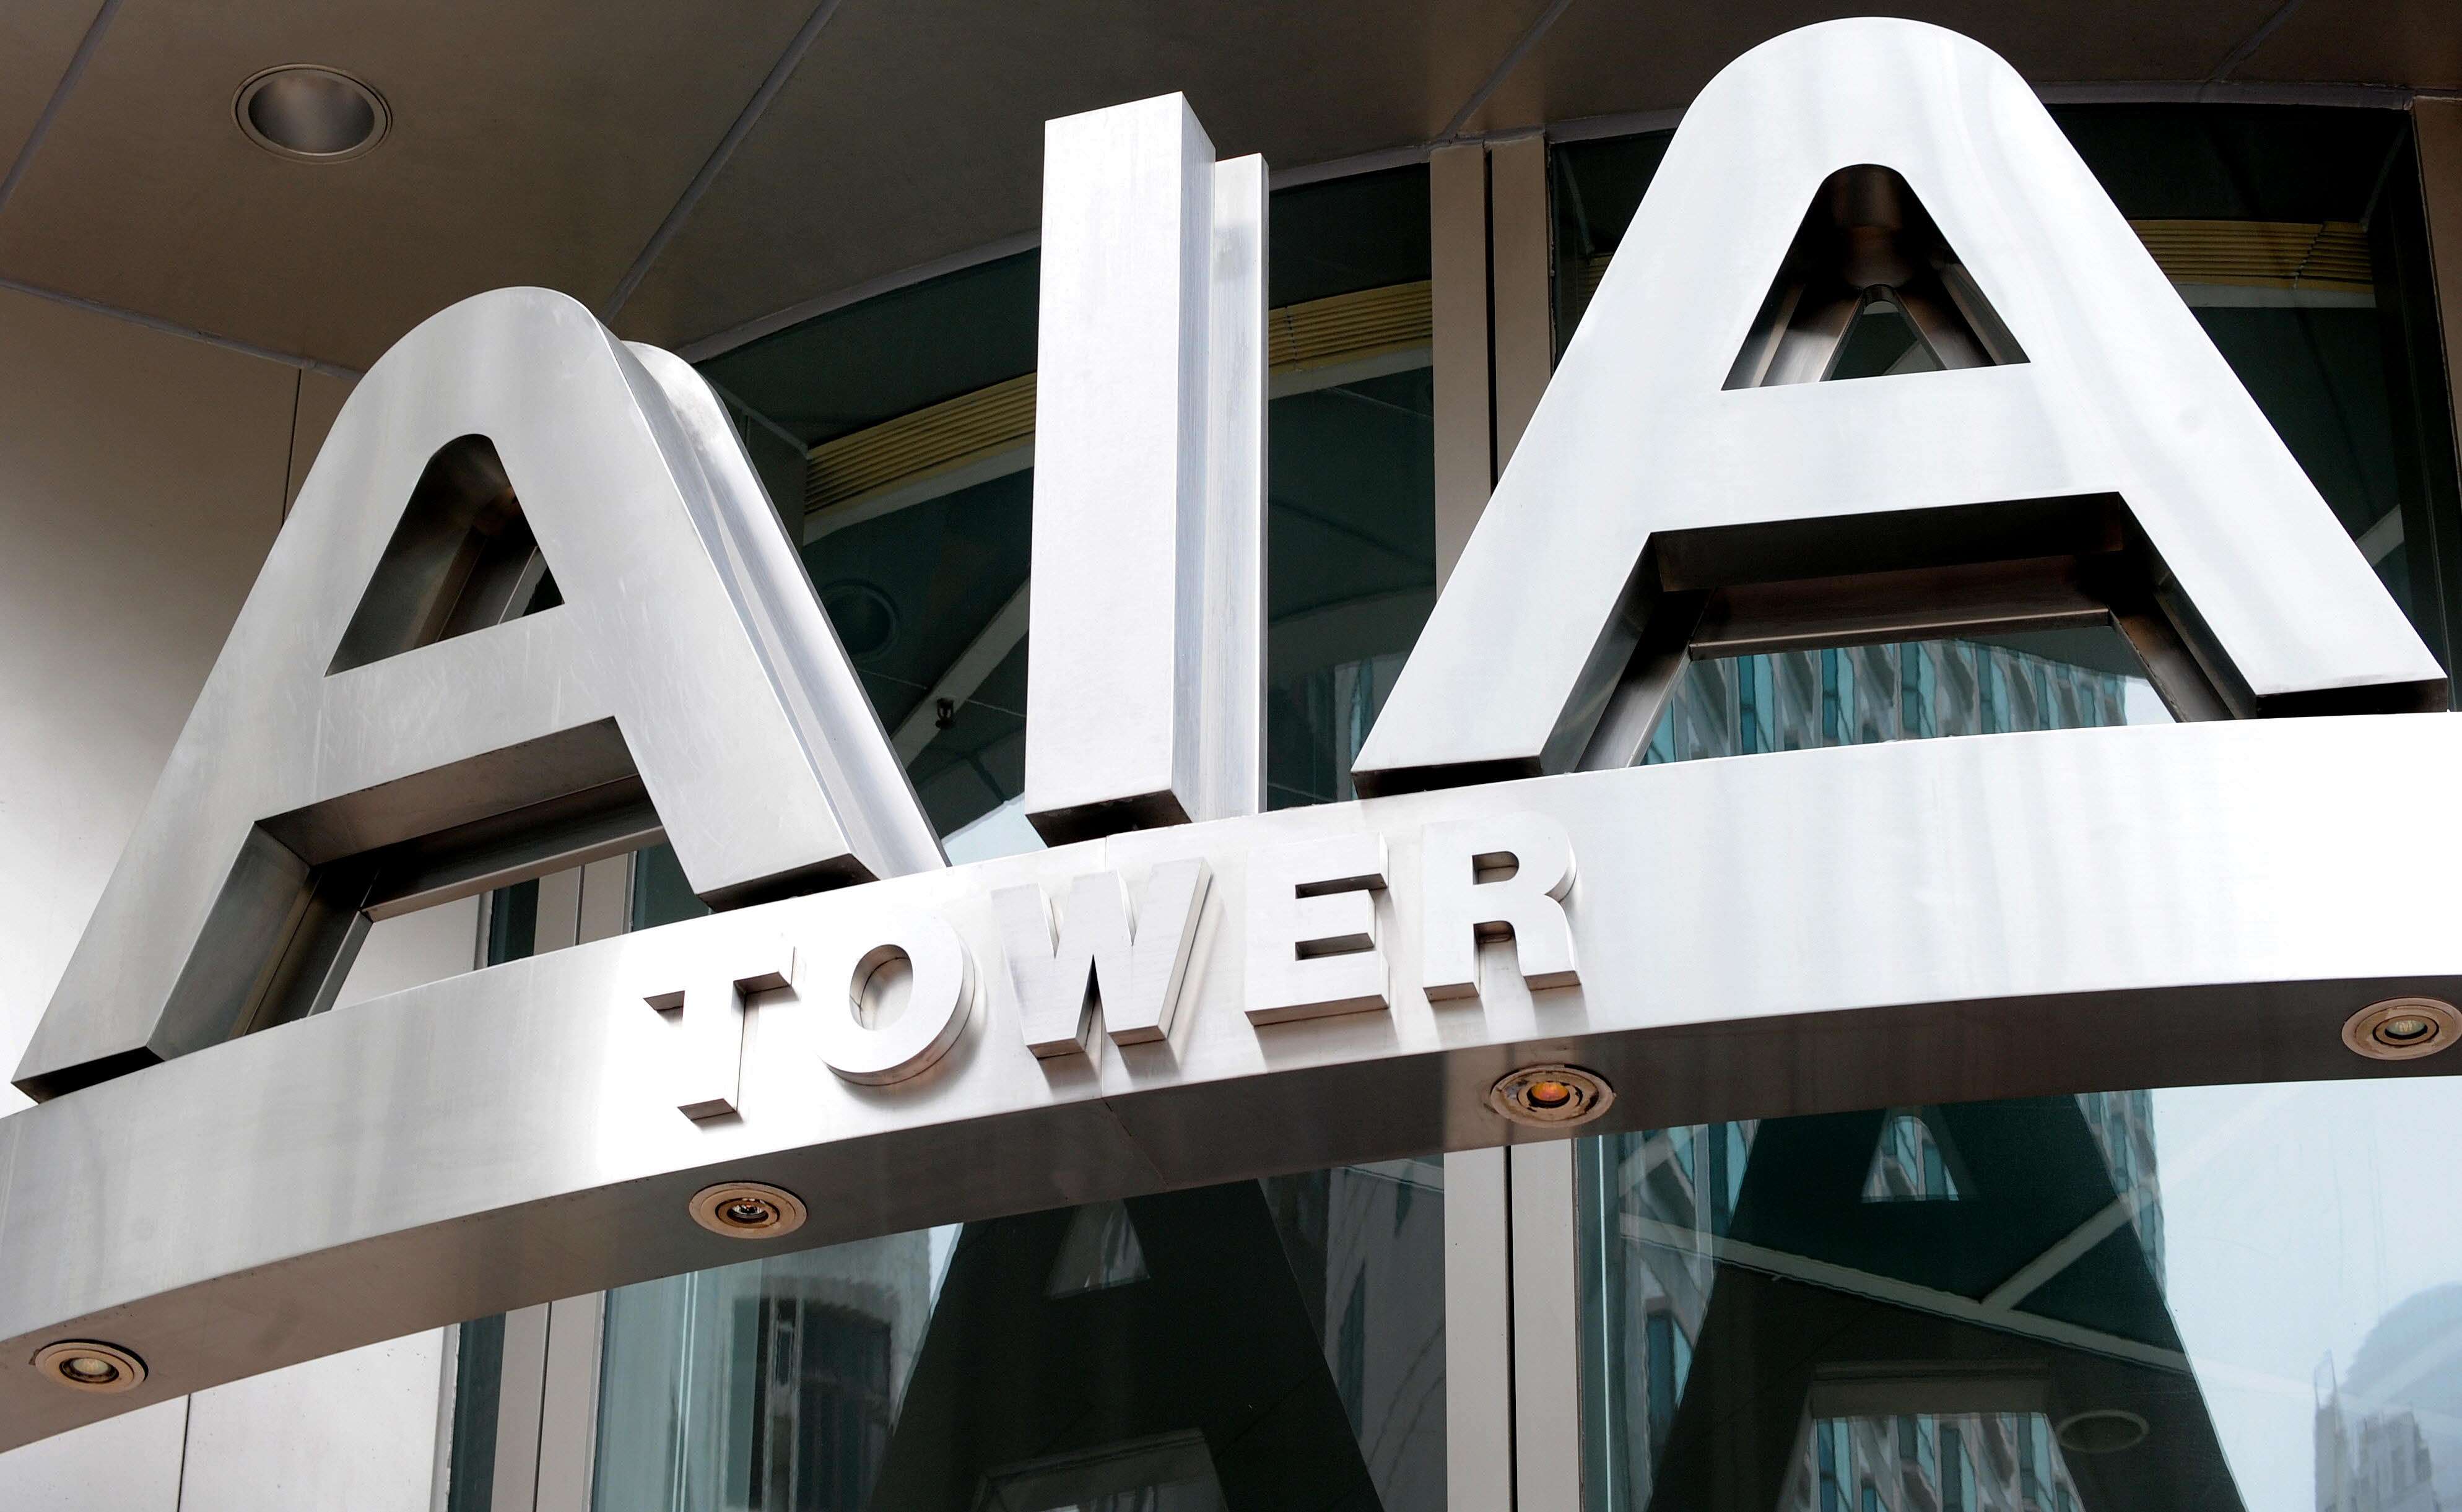 The share price of AIA Group, the largest life insurer in Hong Kong, has slid 20 per cent from its peak in October. Photo: AFP